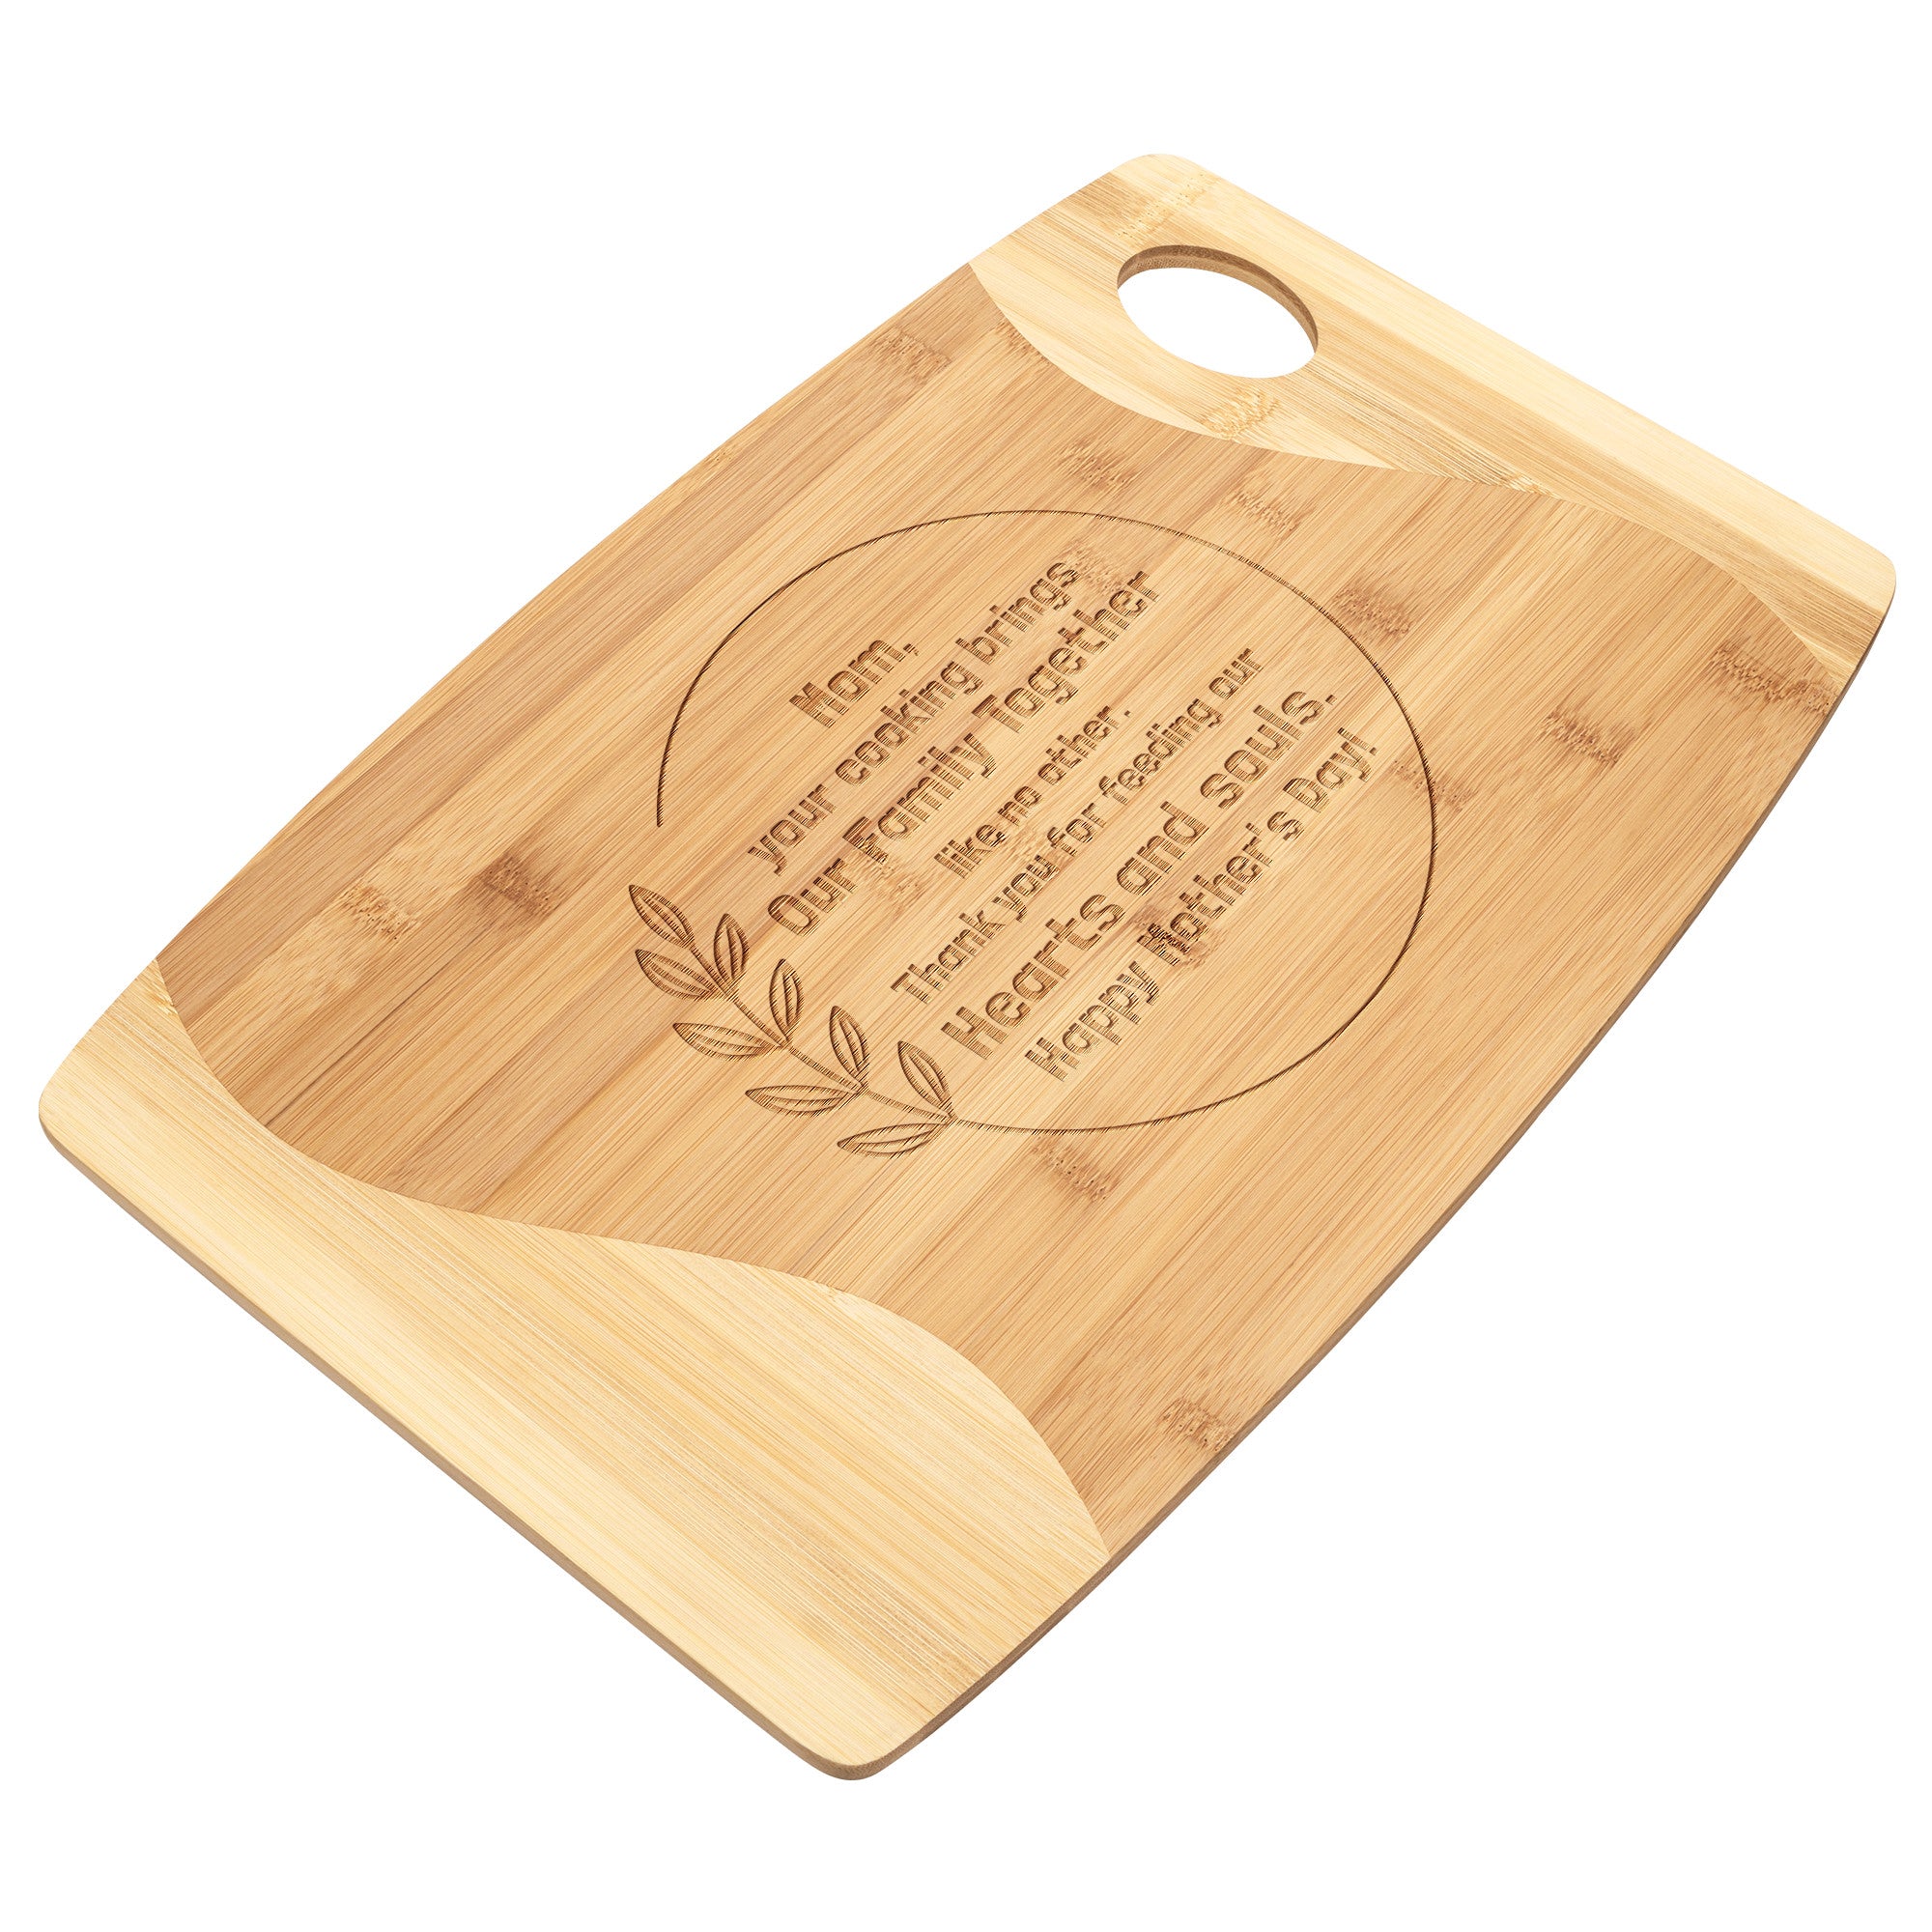 Bring Family Together - Cutting Board for Mother's Day